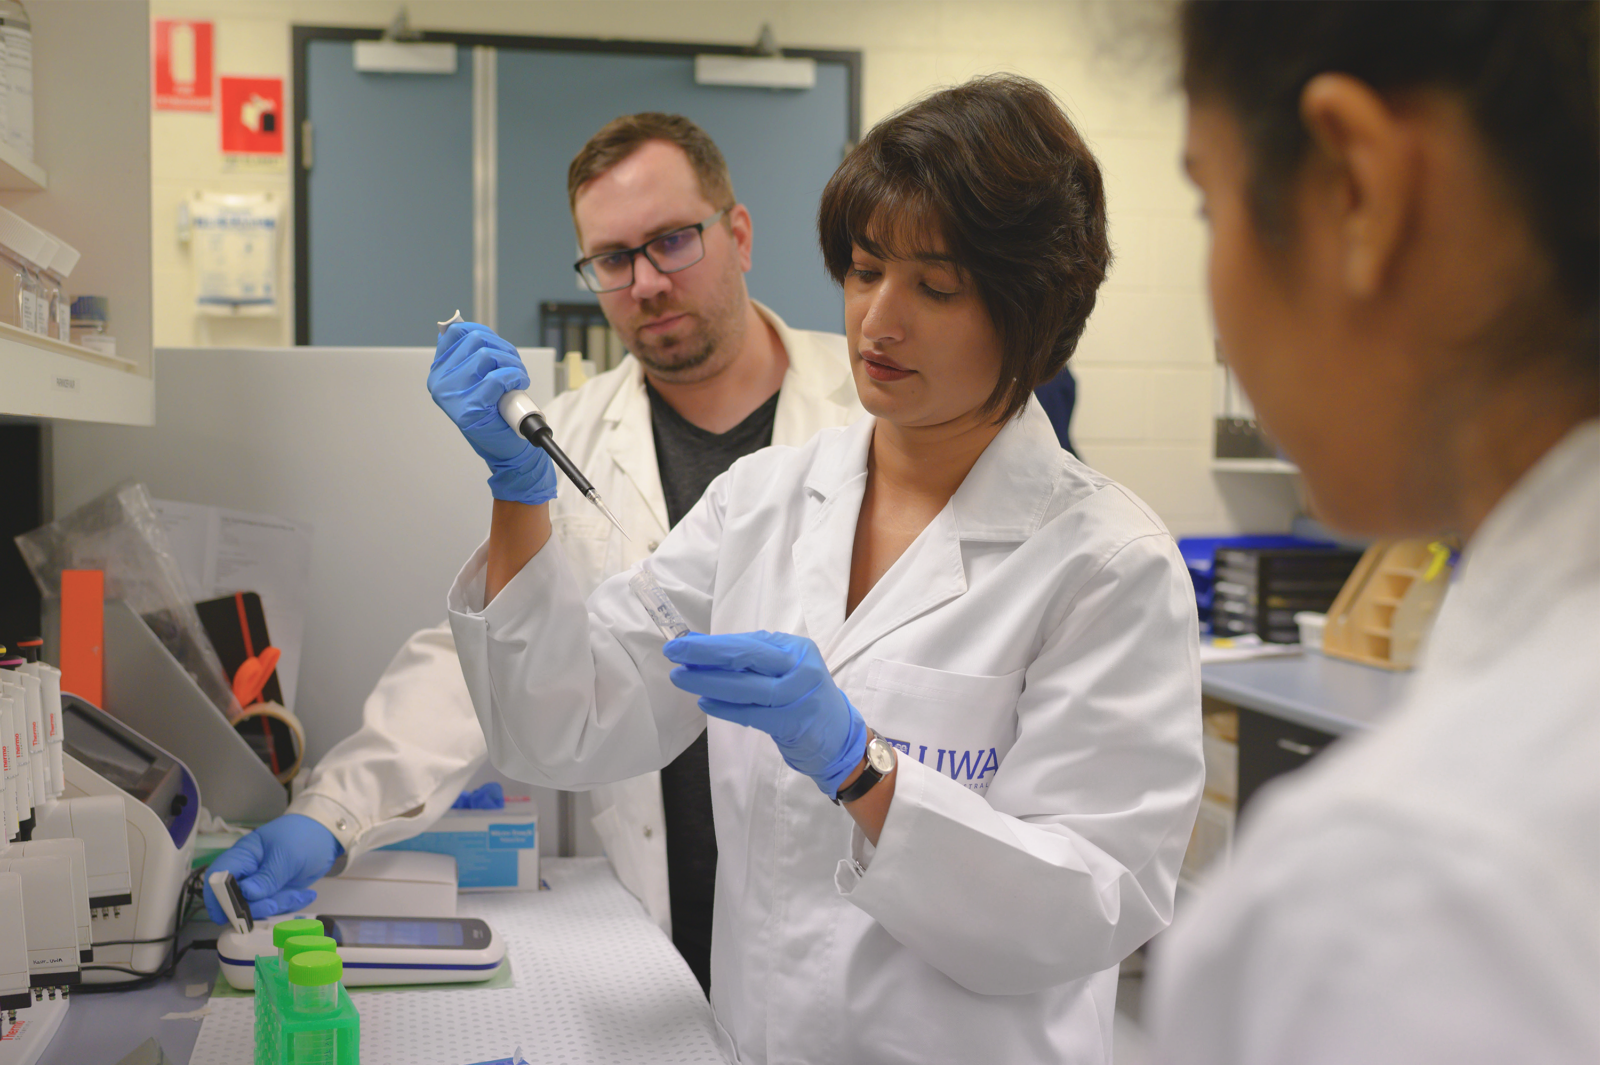 Dr. Kaur (center) with students in her lab at the University of Western Australia.